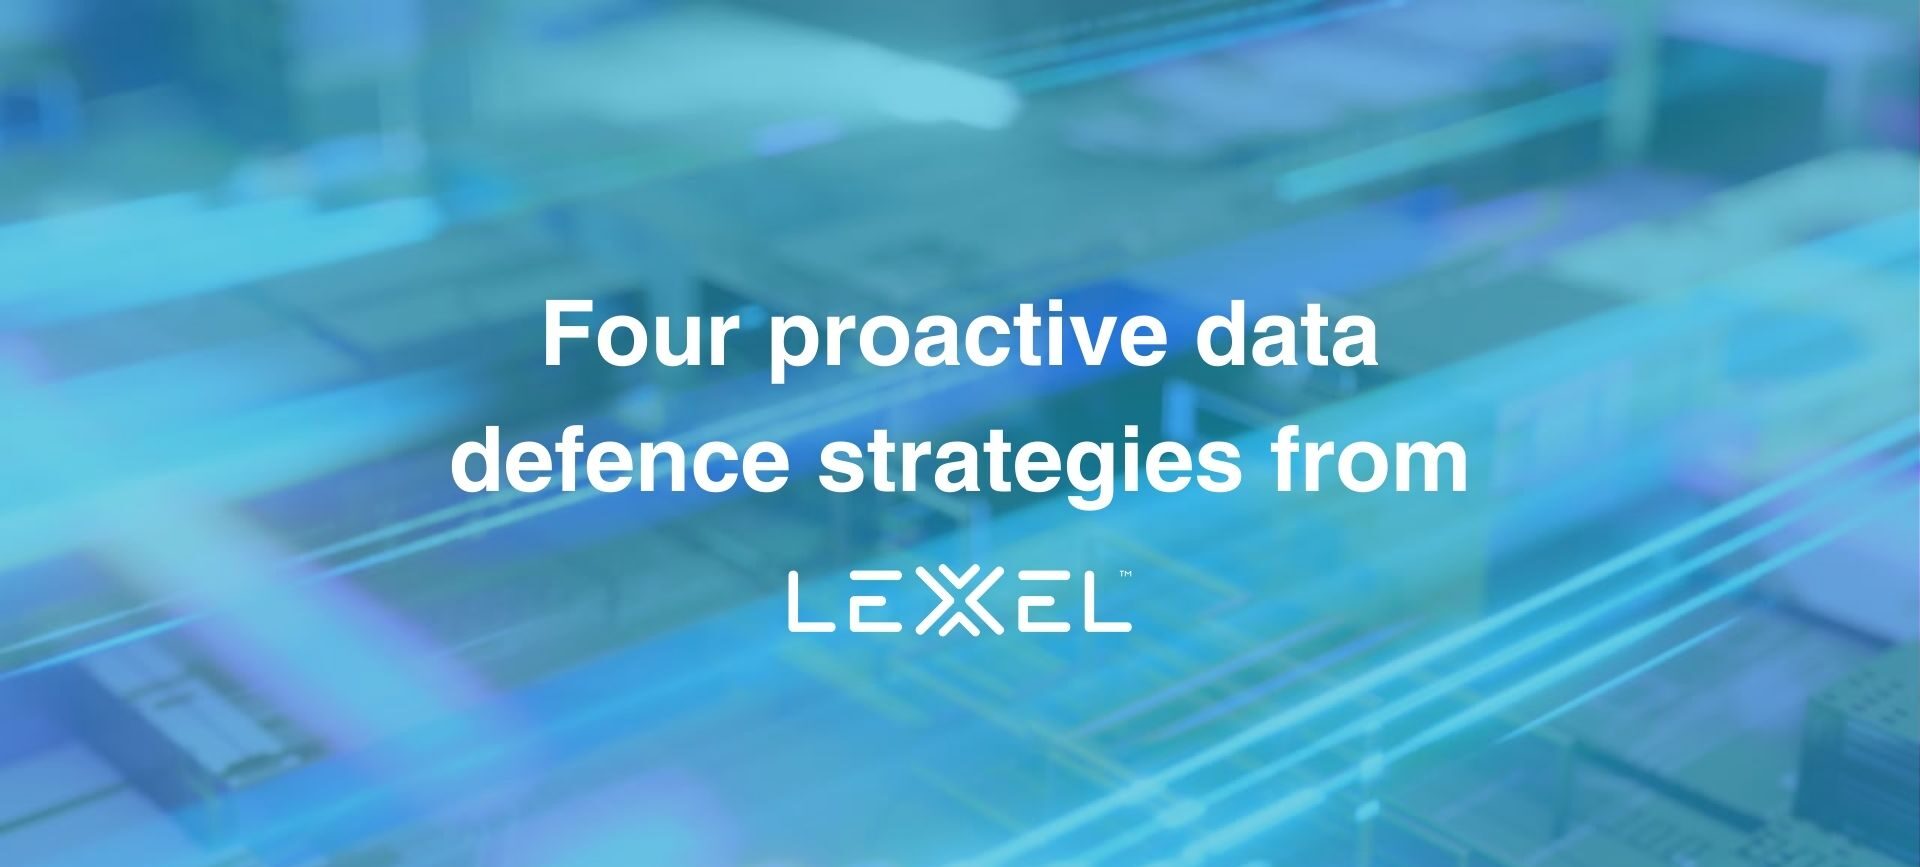 Four proactive data defence strategies from Lexel